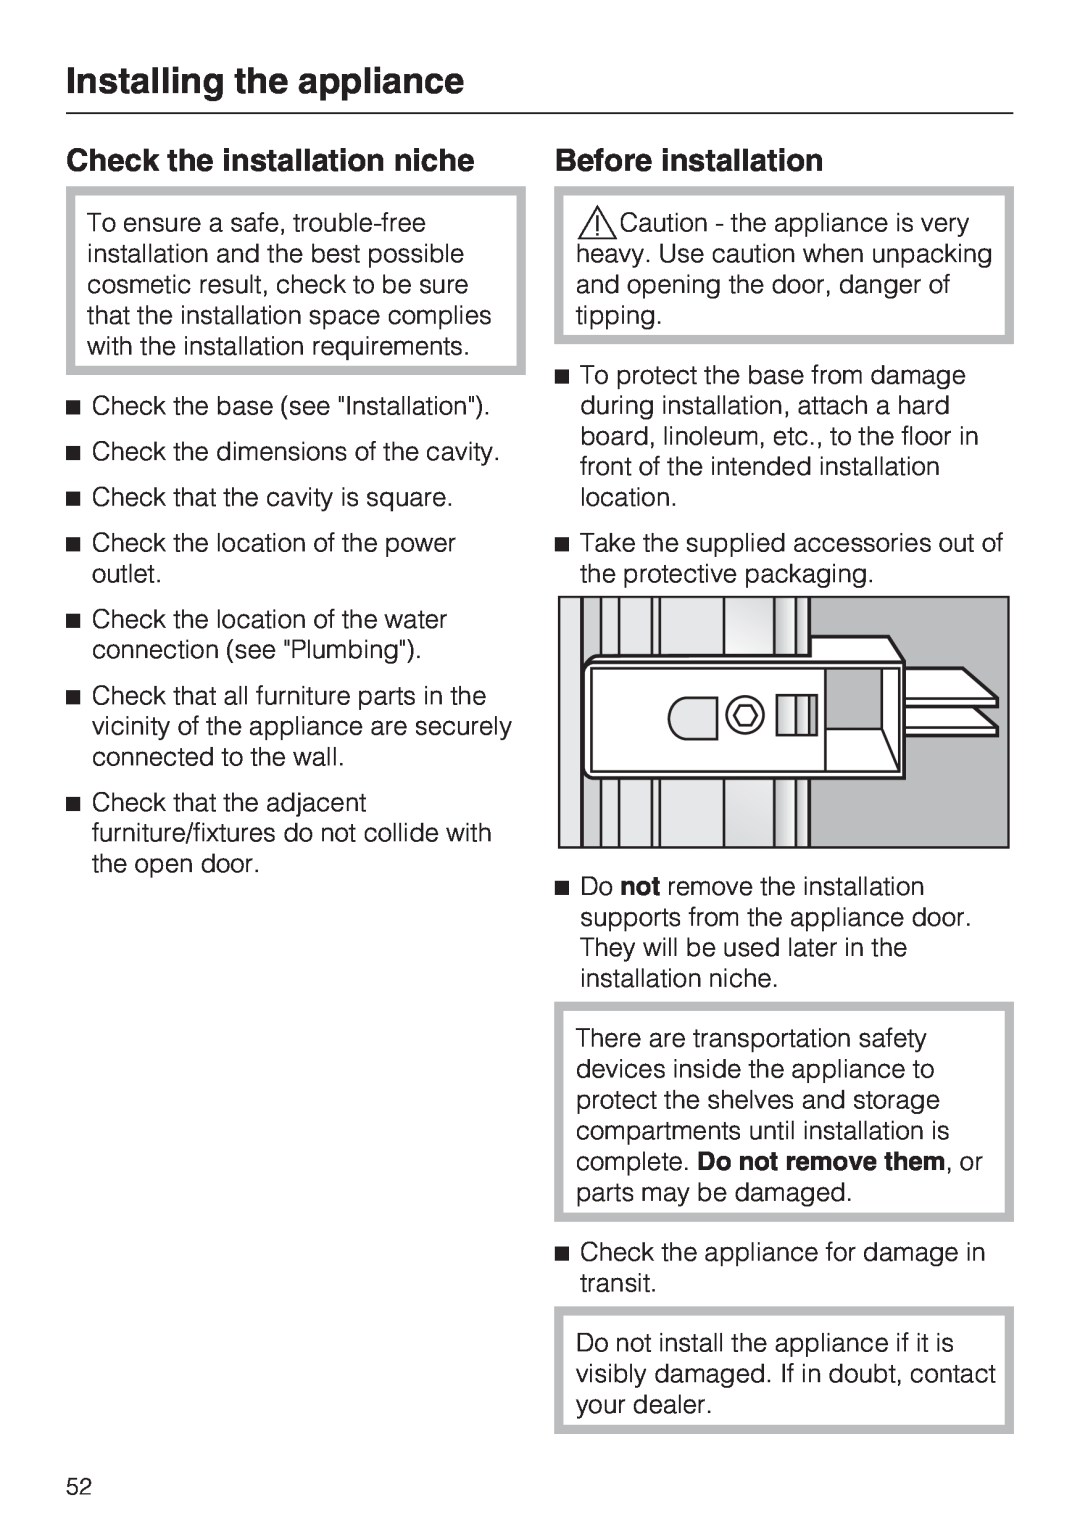 Miele F1411VI installation instructions Check the installation niche, Before installation, Installing the appliance 